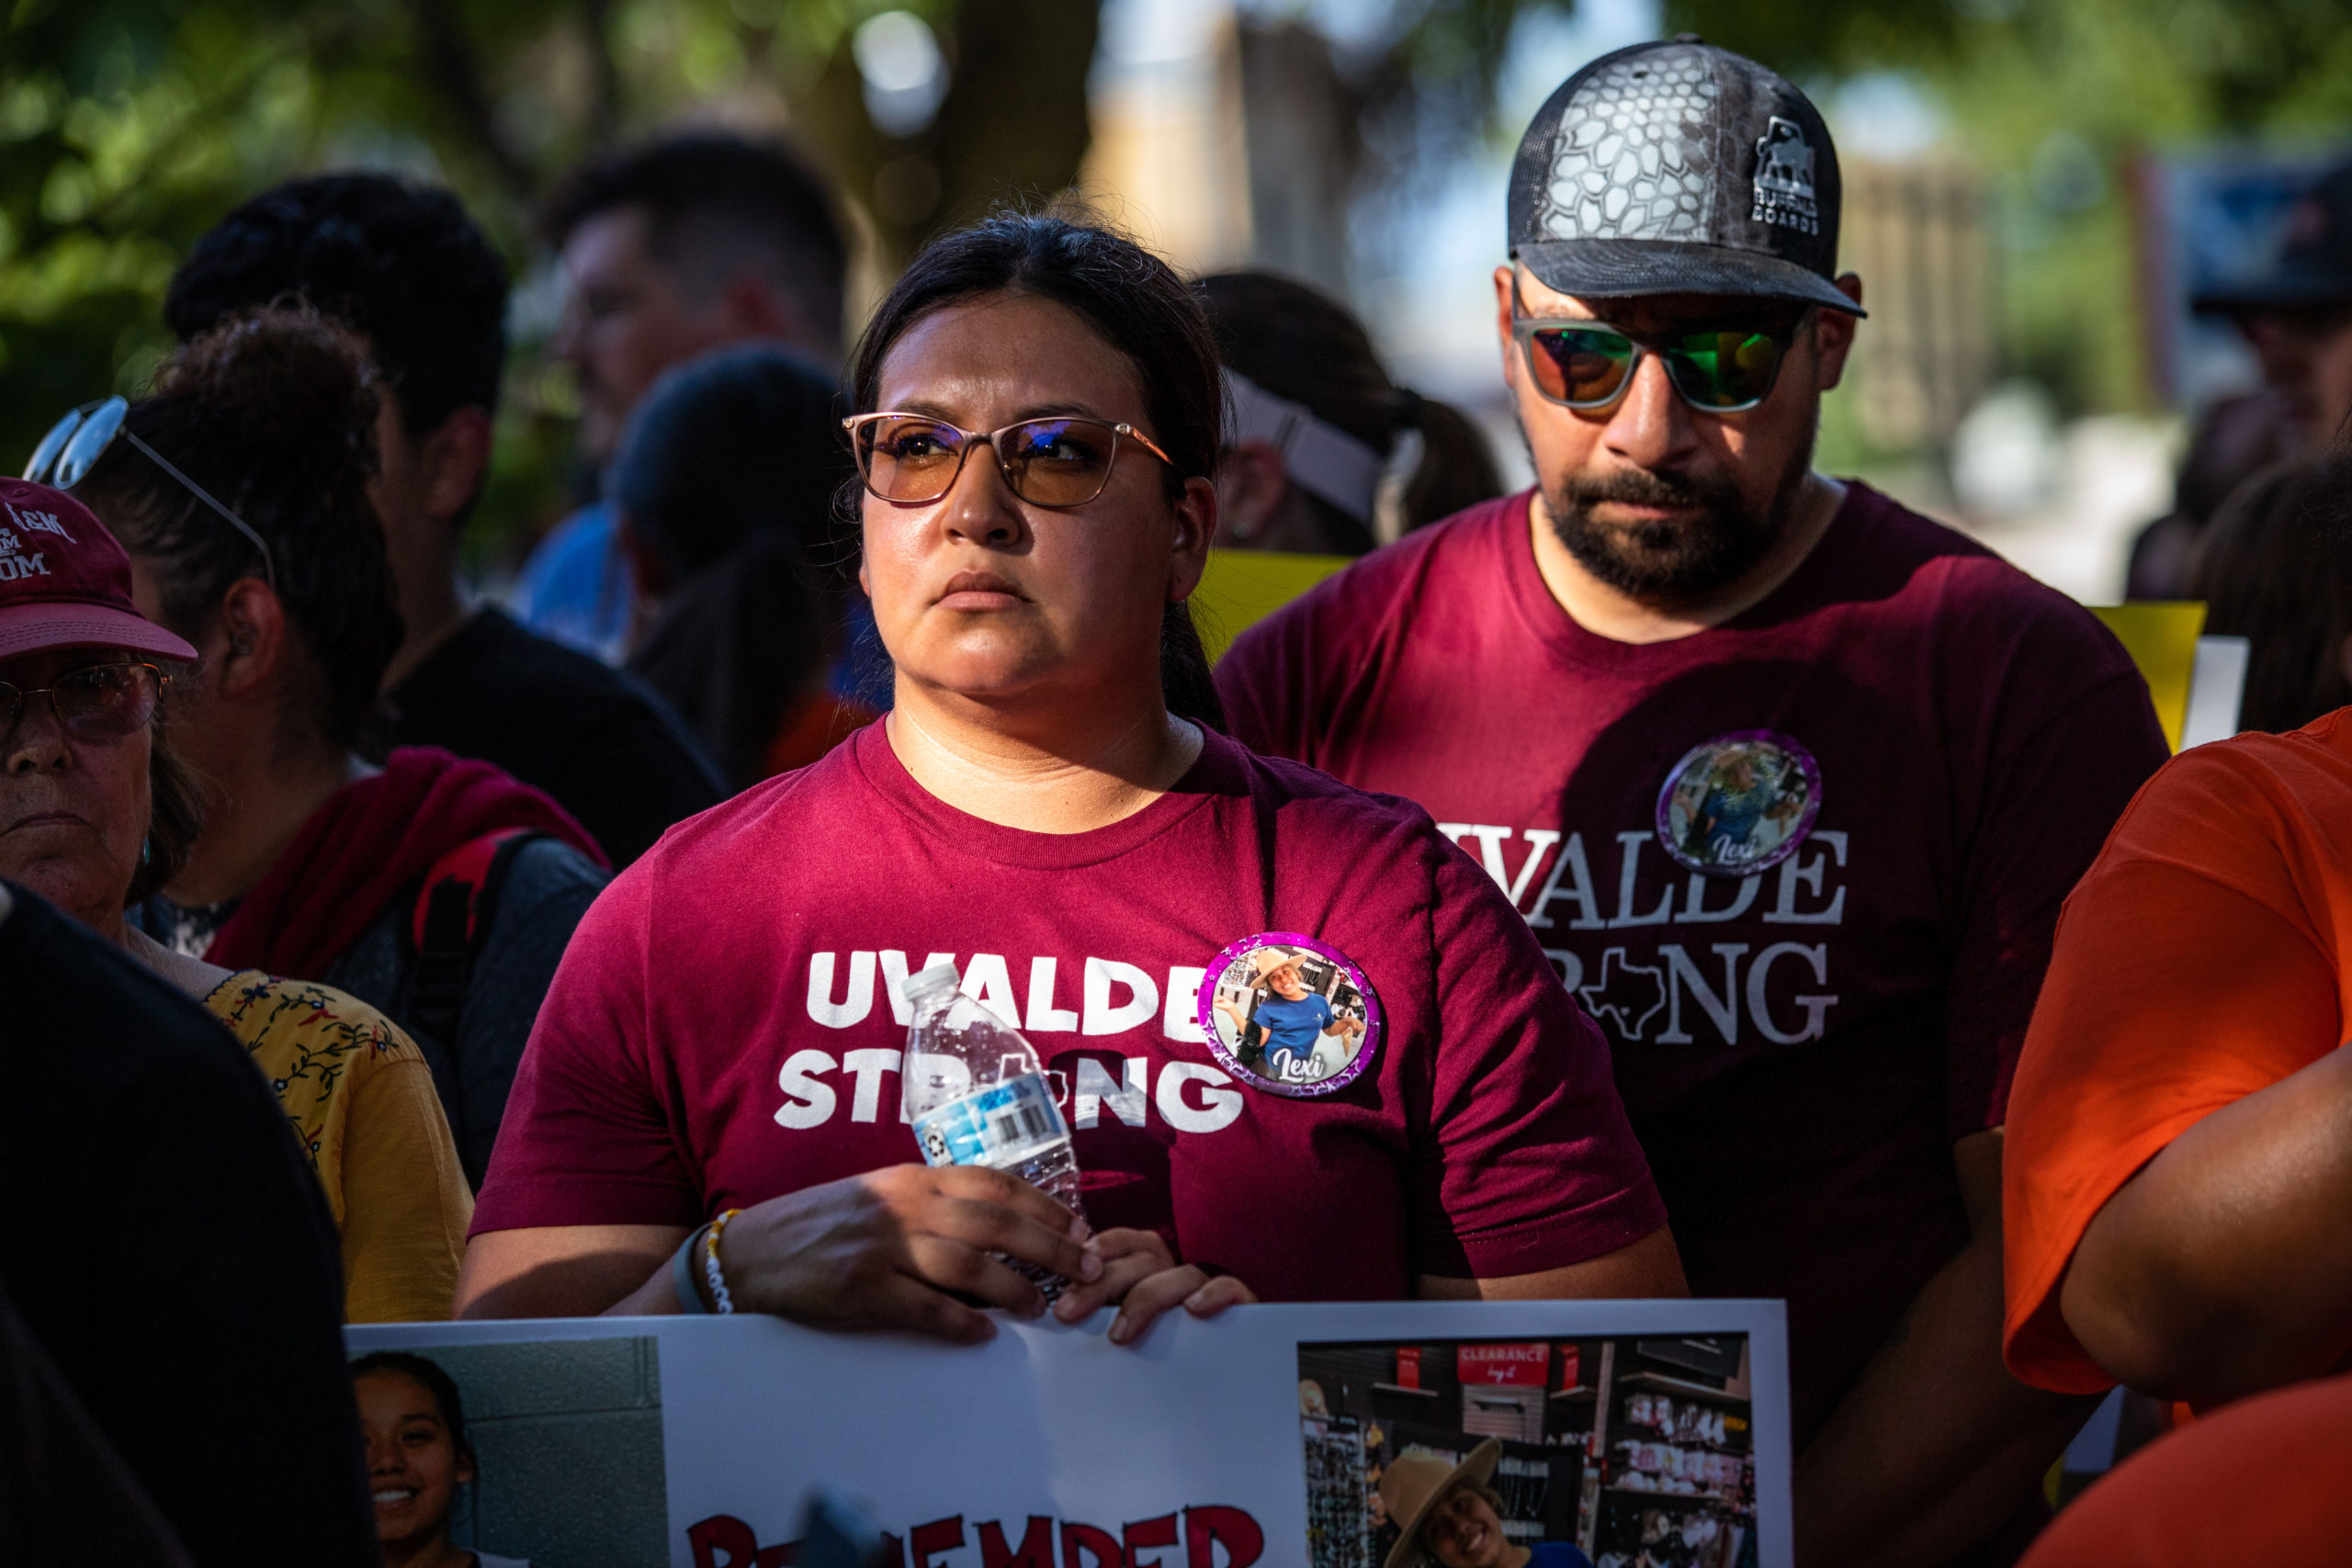 THE PHRASE “UVALDE STRONG” HAS BECOME UBIQUITOUS IN TOWN SINCE THE MAY 24 SHOOTING. KAYLEE GREENLEE BEAL/TEXAS OBSERVER